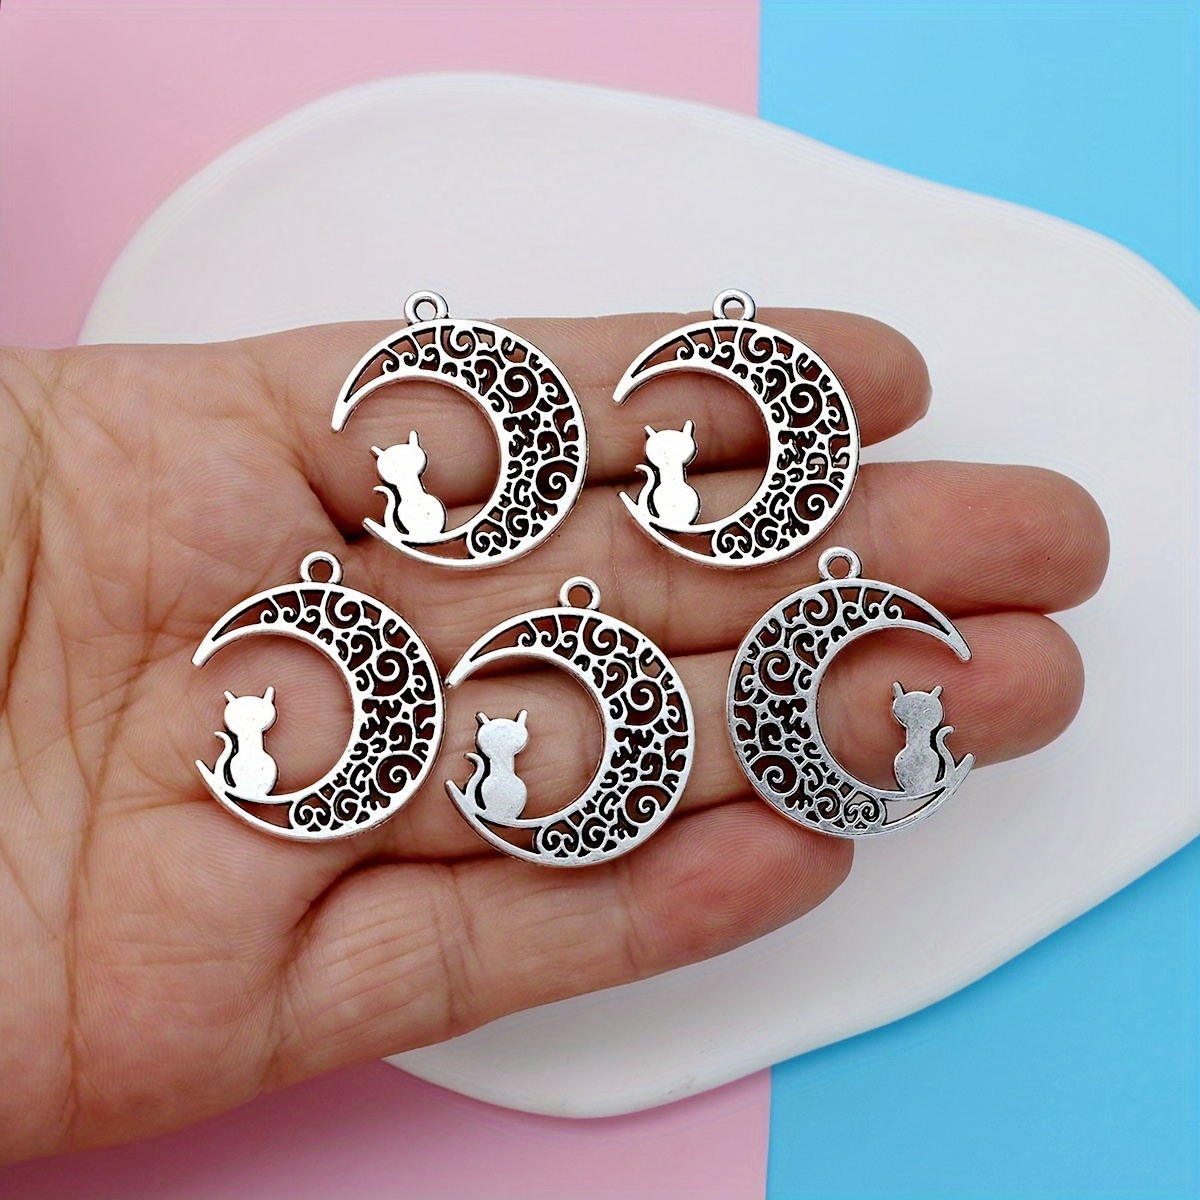 Moon Cat Cat Charm Antique Alloy Metal Pendants For DIY Jewelry Making  30x26mm Fits Earrings, Necklaces, And Bracelets From Cambay_jewelry, $15.64